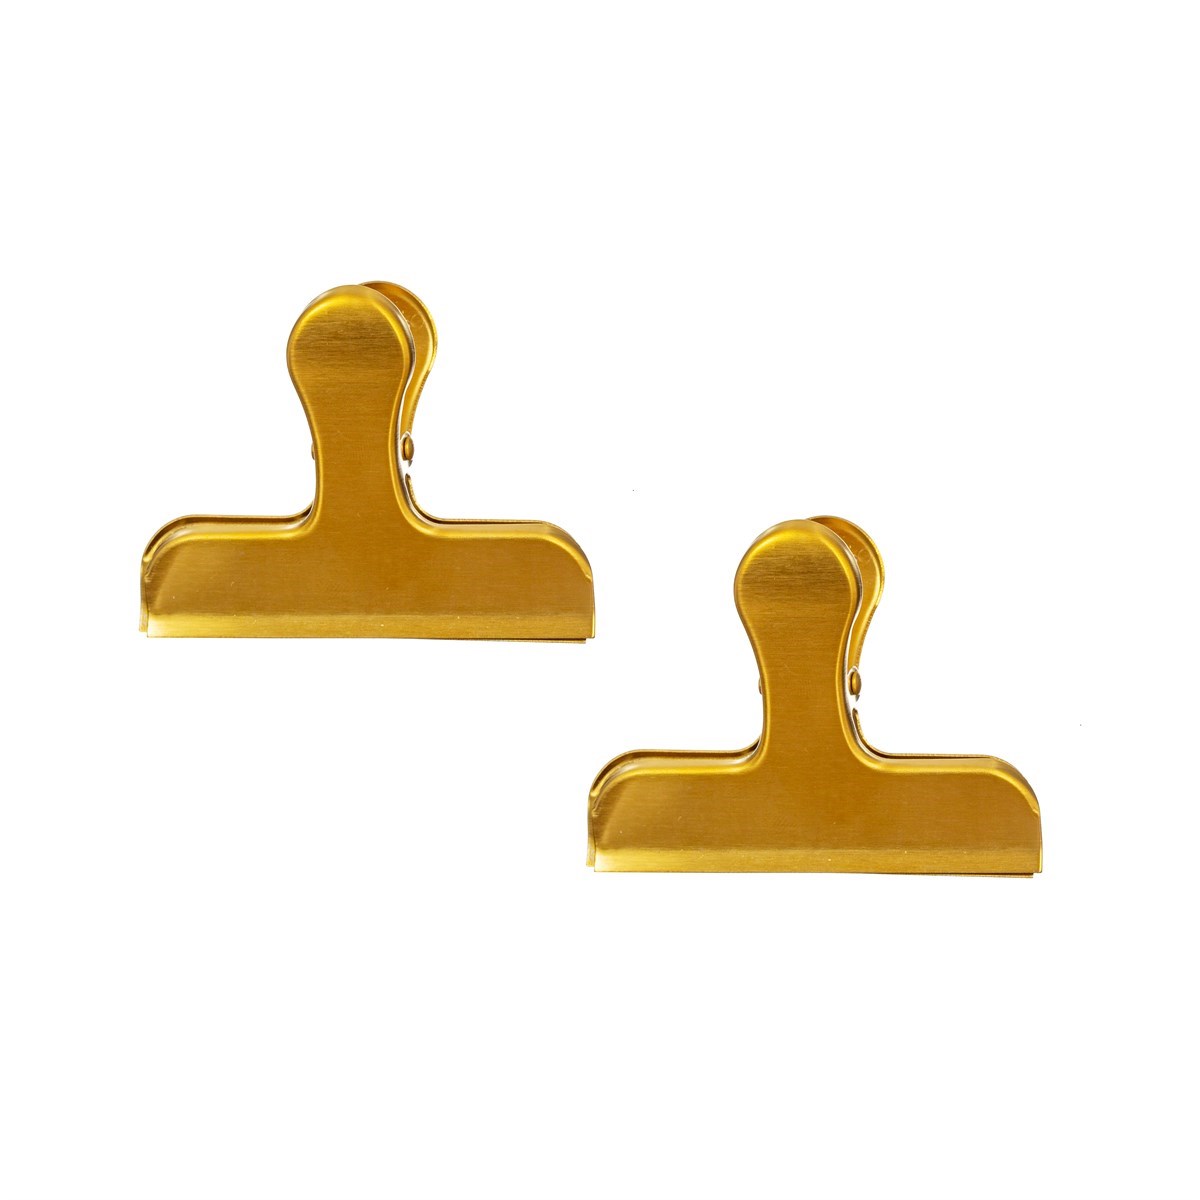 Brass Clip Duo - Set of 2